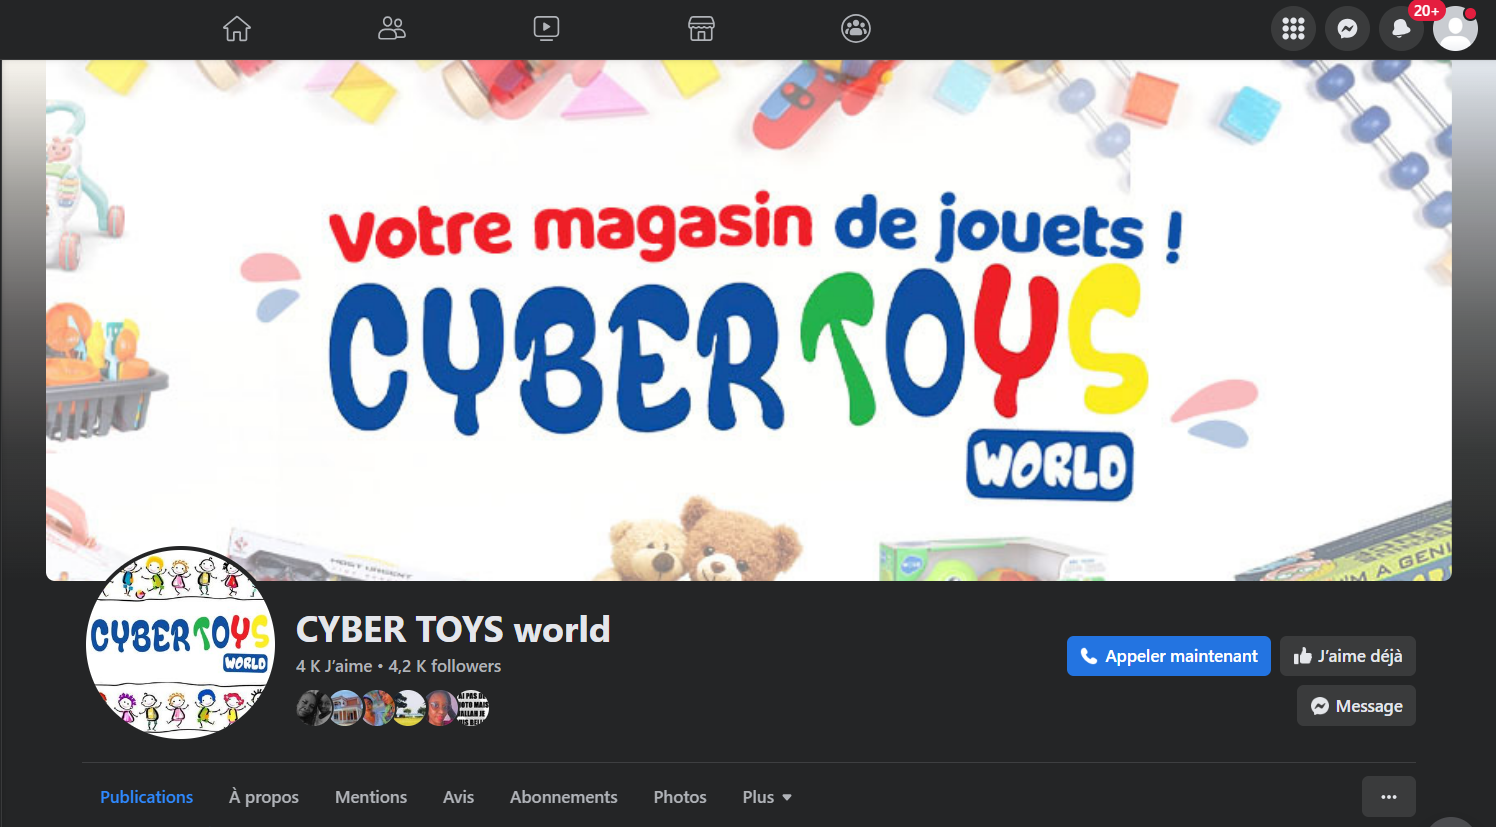 Cybers toys world